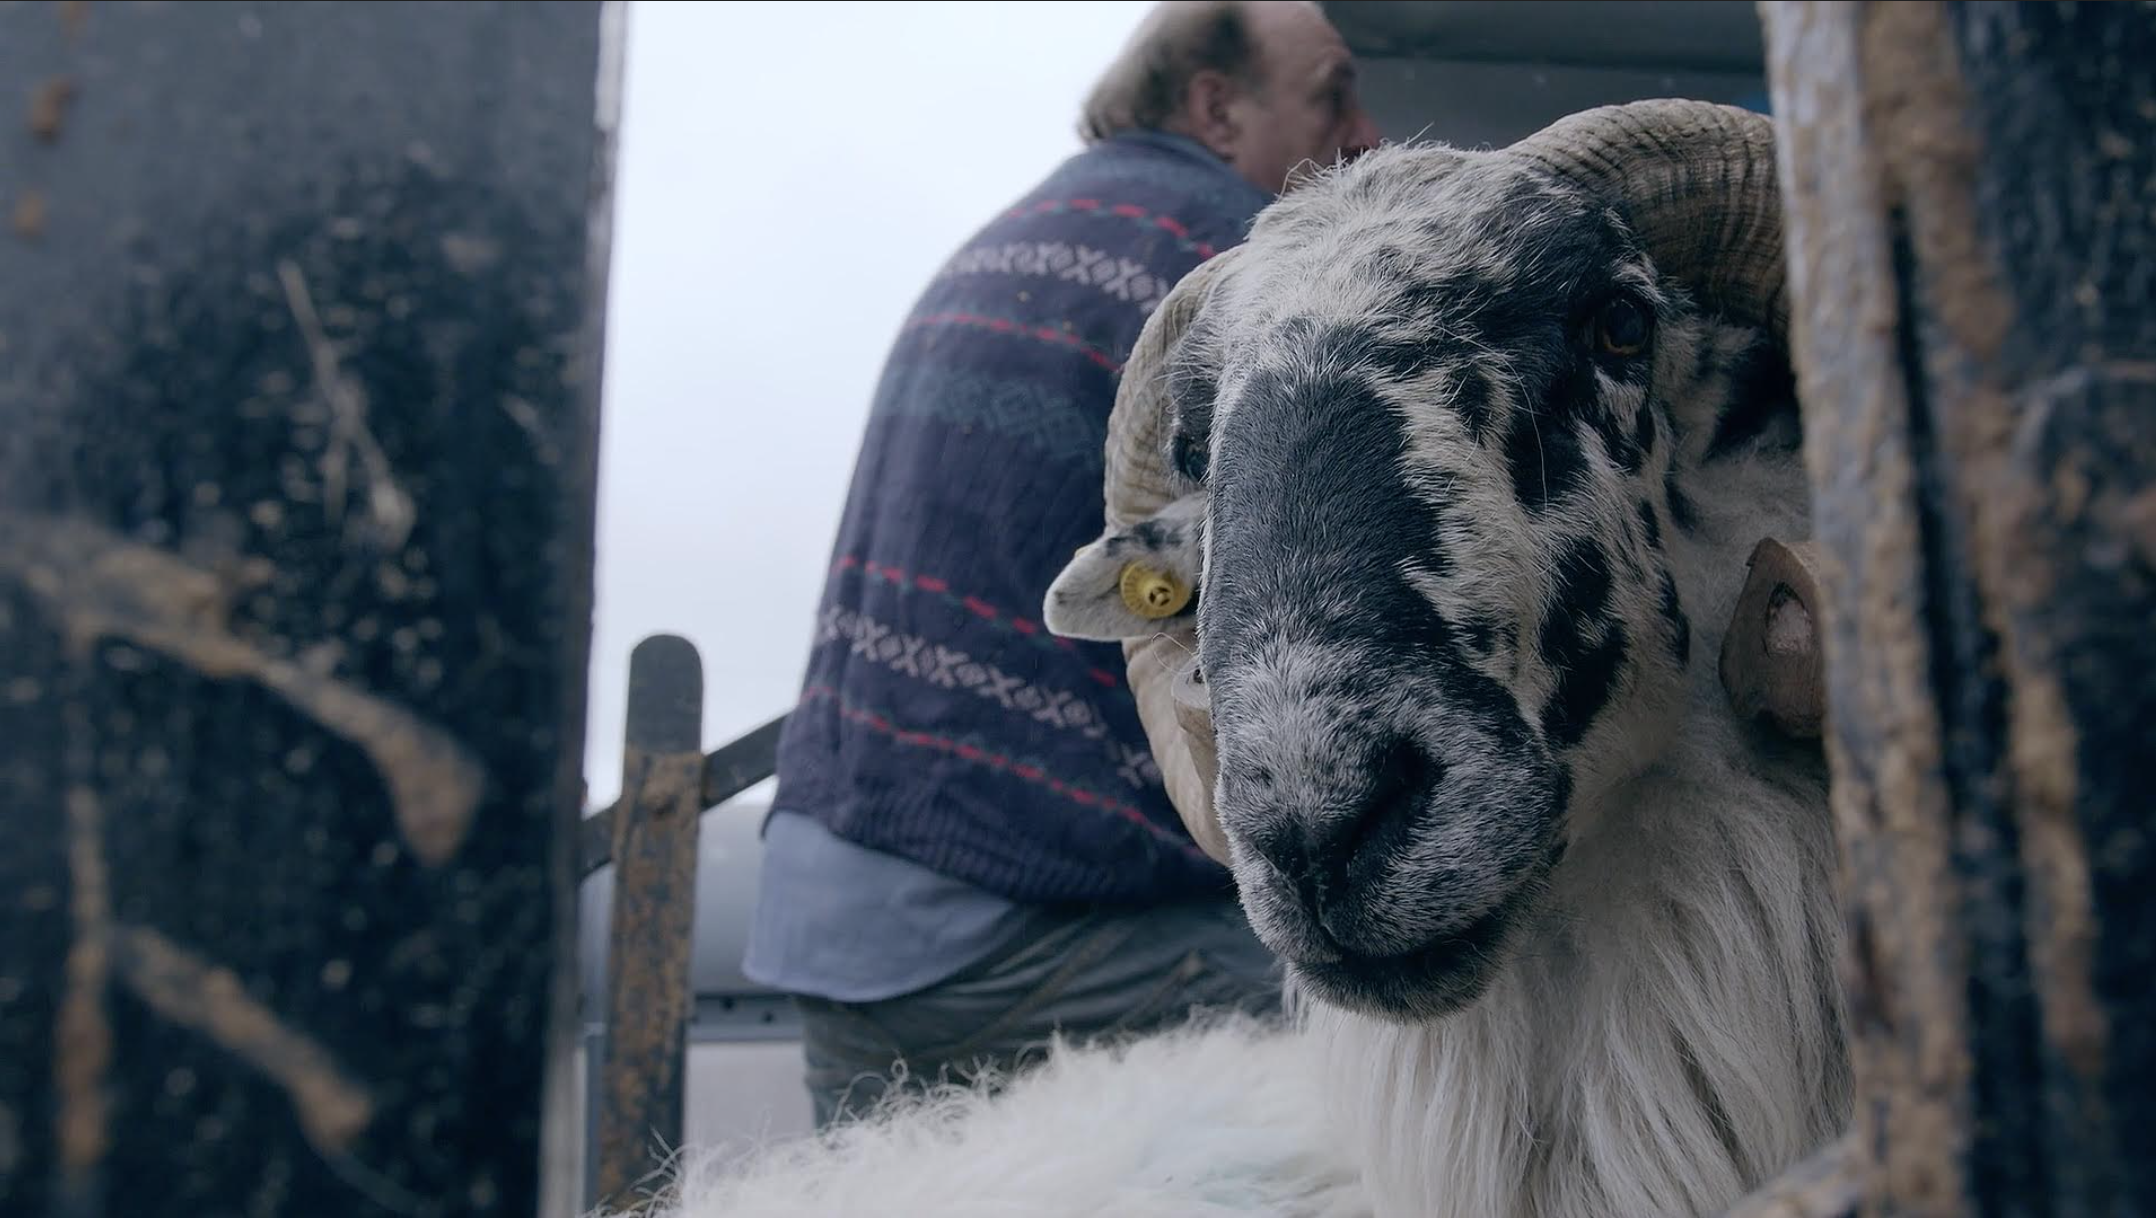 Still from Hungry Hill. Image Description: The black and white patterned face of a sheep is shown in centre of the image. There is a farmer in the background of the image. 